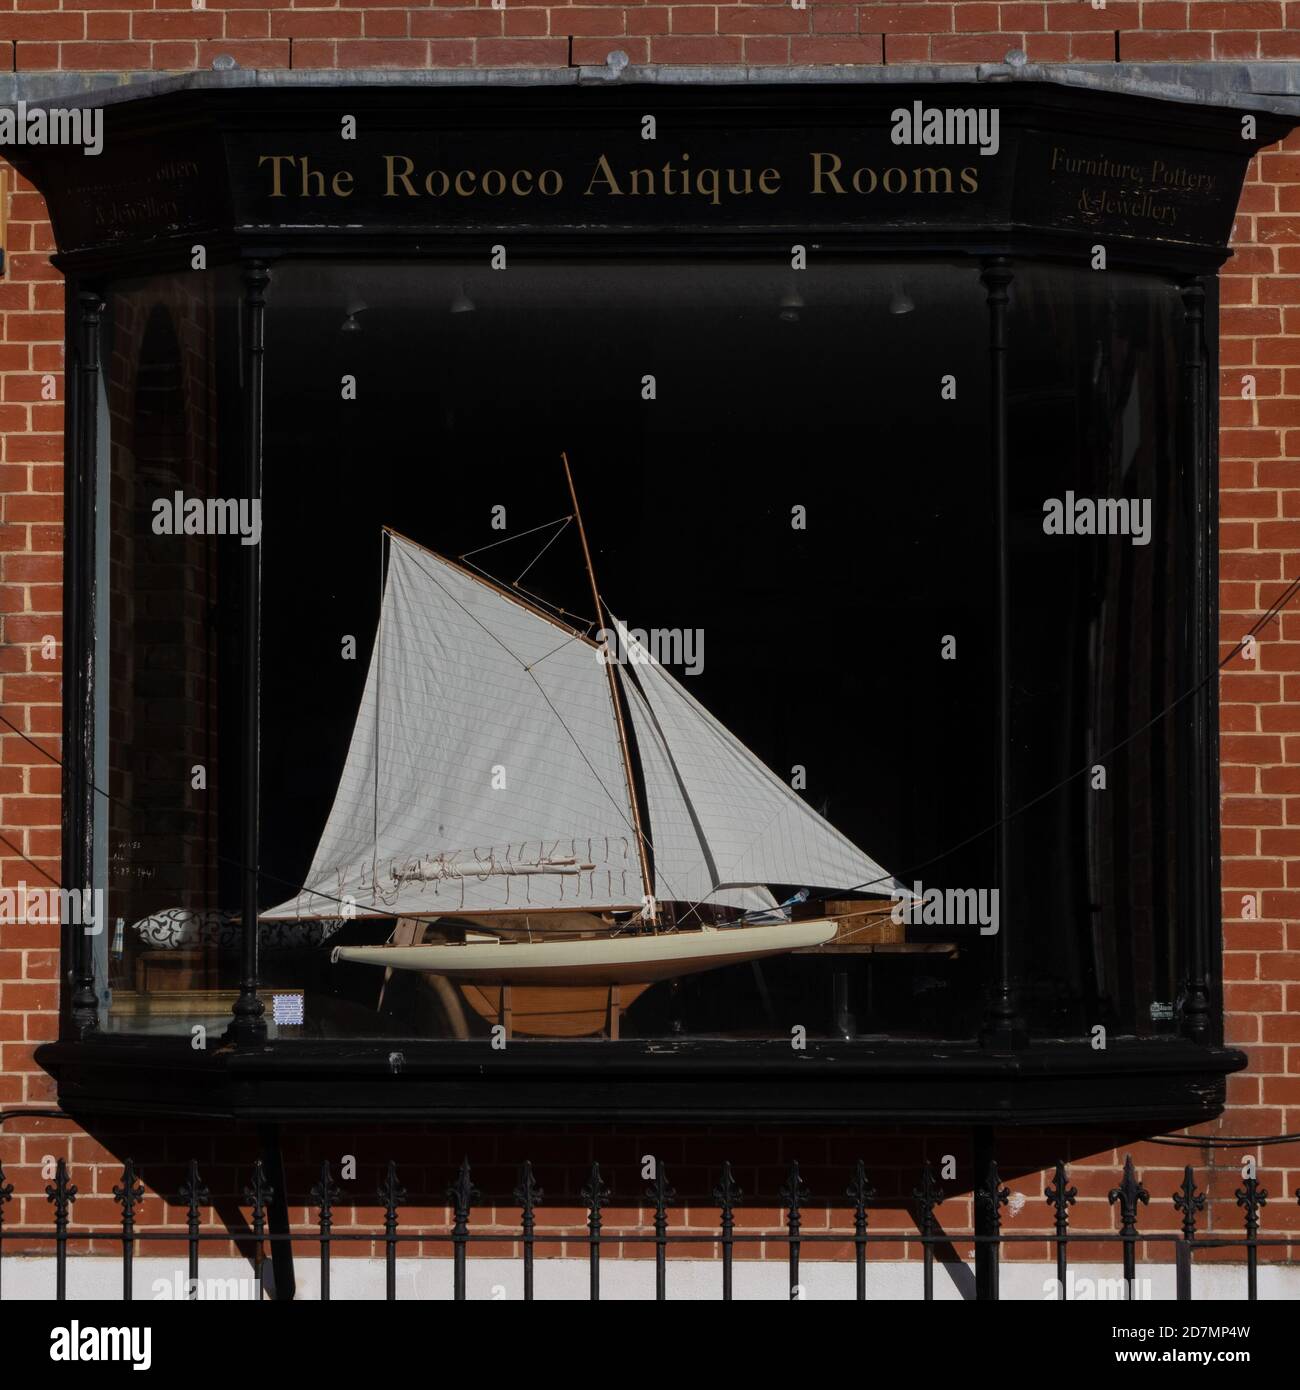 The sun picking out beautifully an antique model yacht in the window of Rococo Antique Rooms, Northam, Southampton, Hampshire, UK. Stock Photo